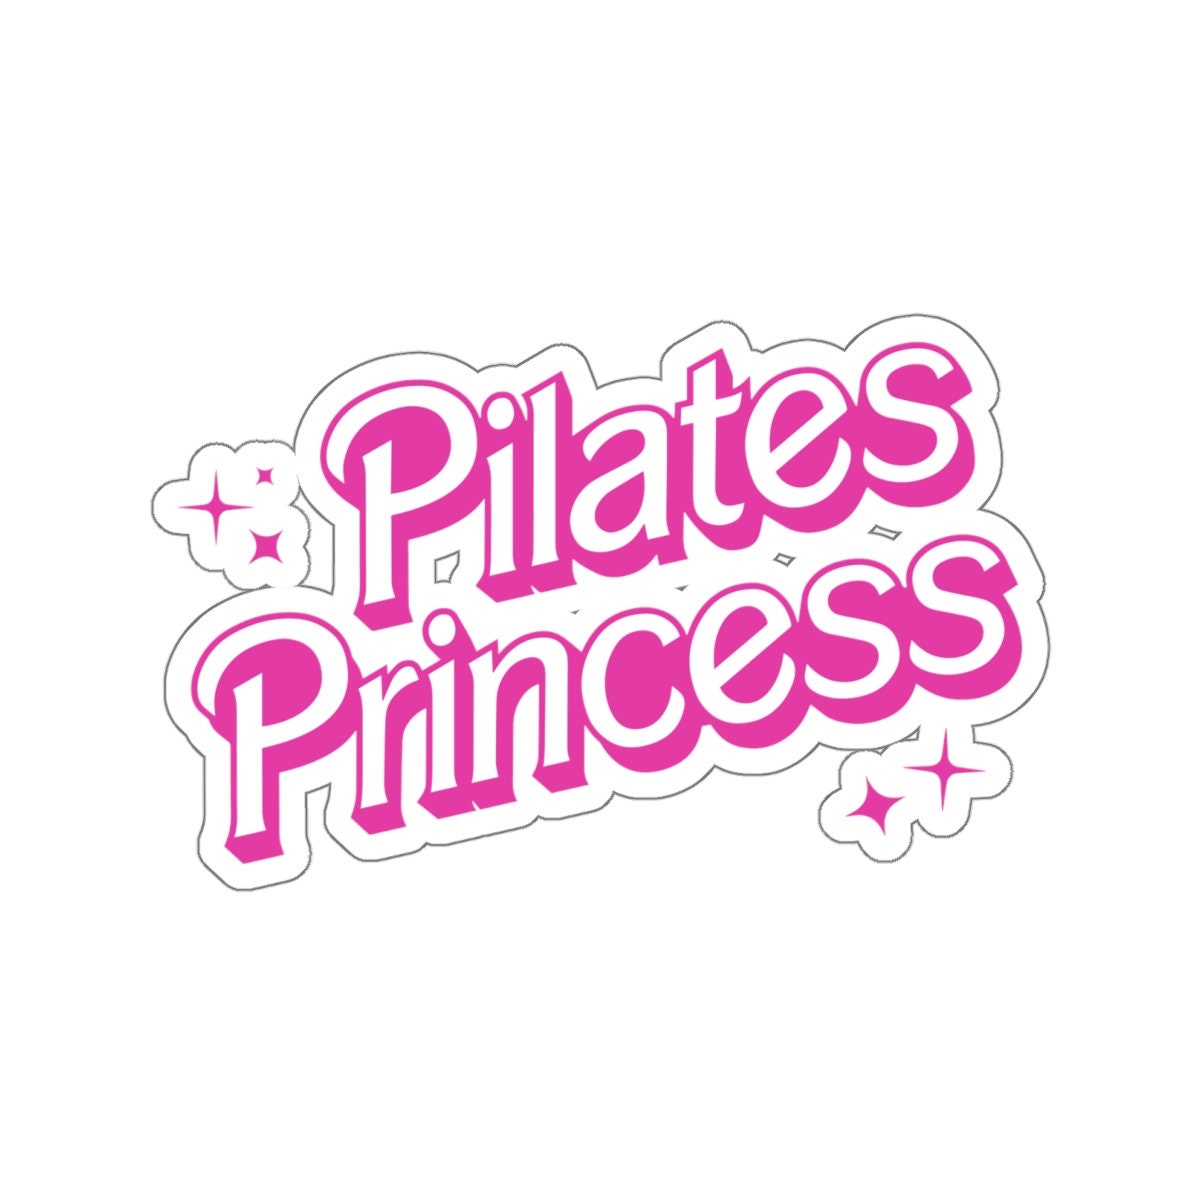 pink pilates princess aesthetic Sticker for Sale by aubreesdesigns